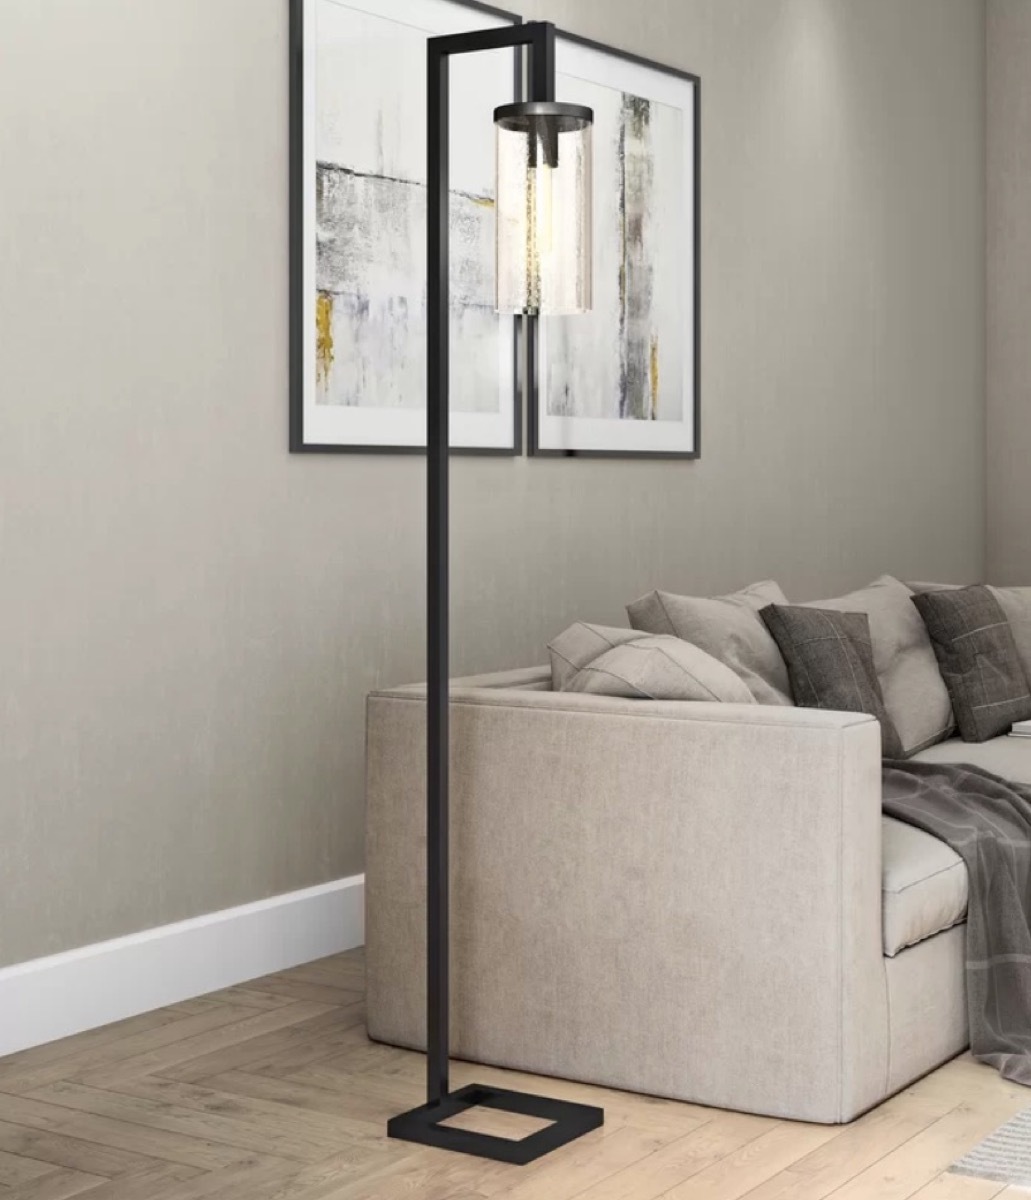 black floor lamp next to gray couch